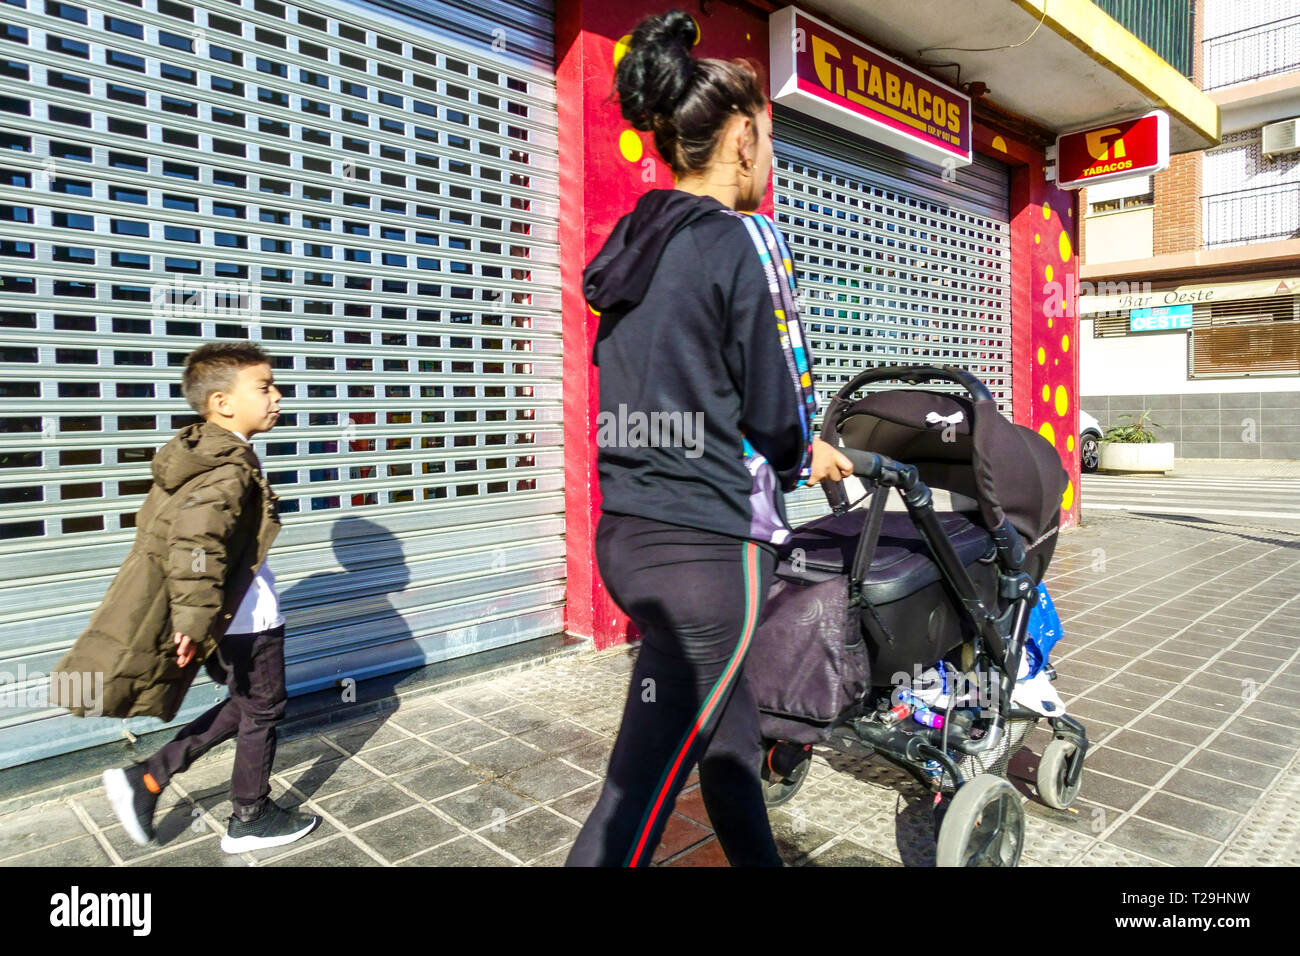 Youn women with son and with the stroller, Street of Valencia, Quart de Poblet district, Spain Stock Photo